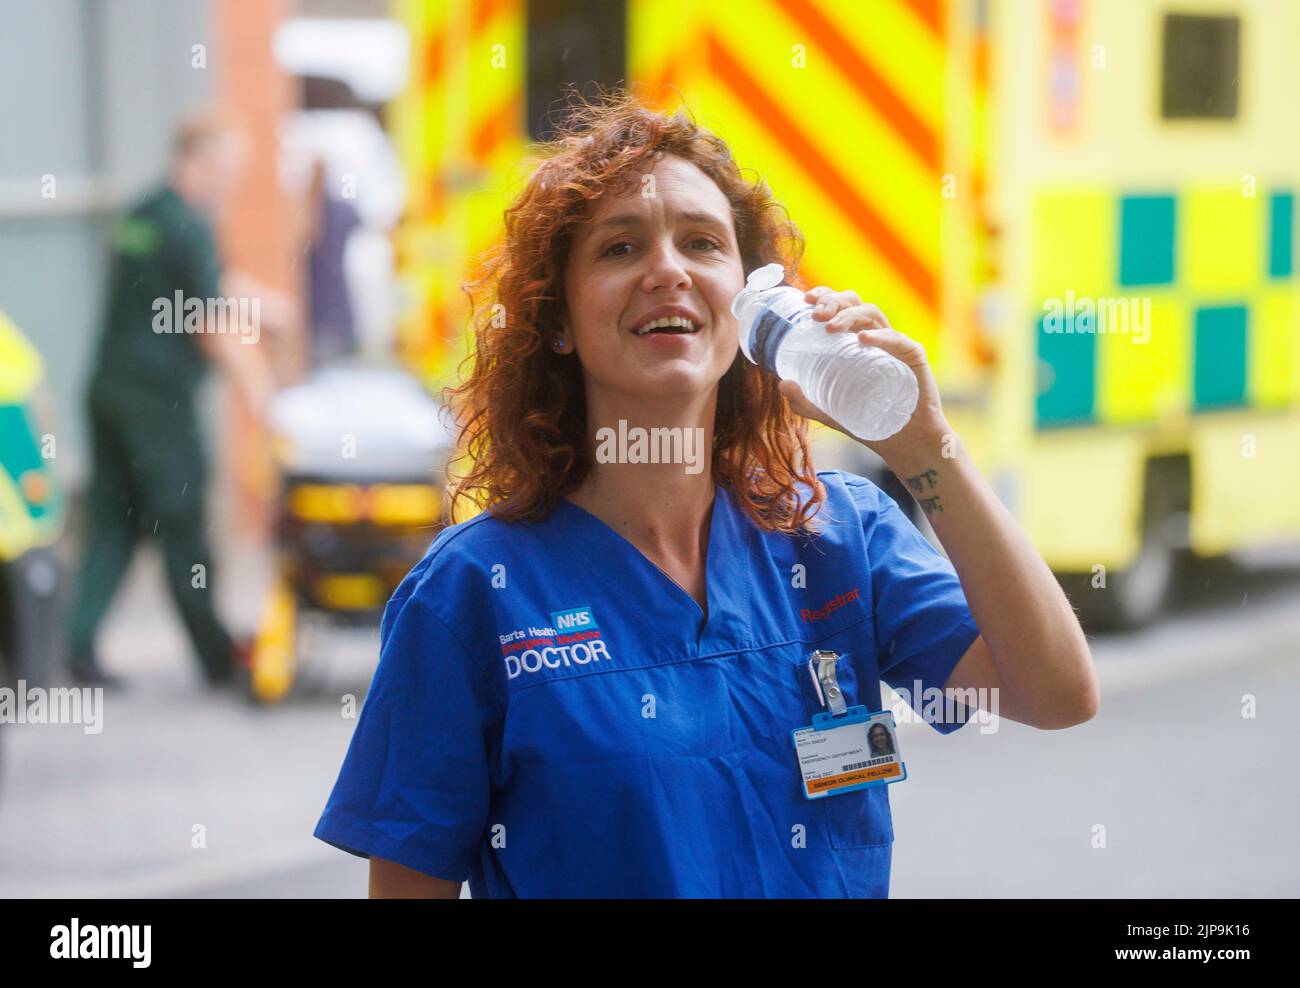 An NHS doctor cools off with a drink of water during a break at a London Hospital. The NHS is under pressure with underfunding and work pressure. Stock Photo